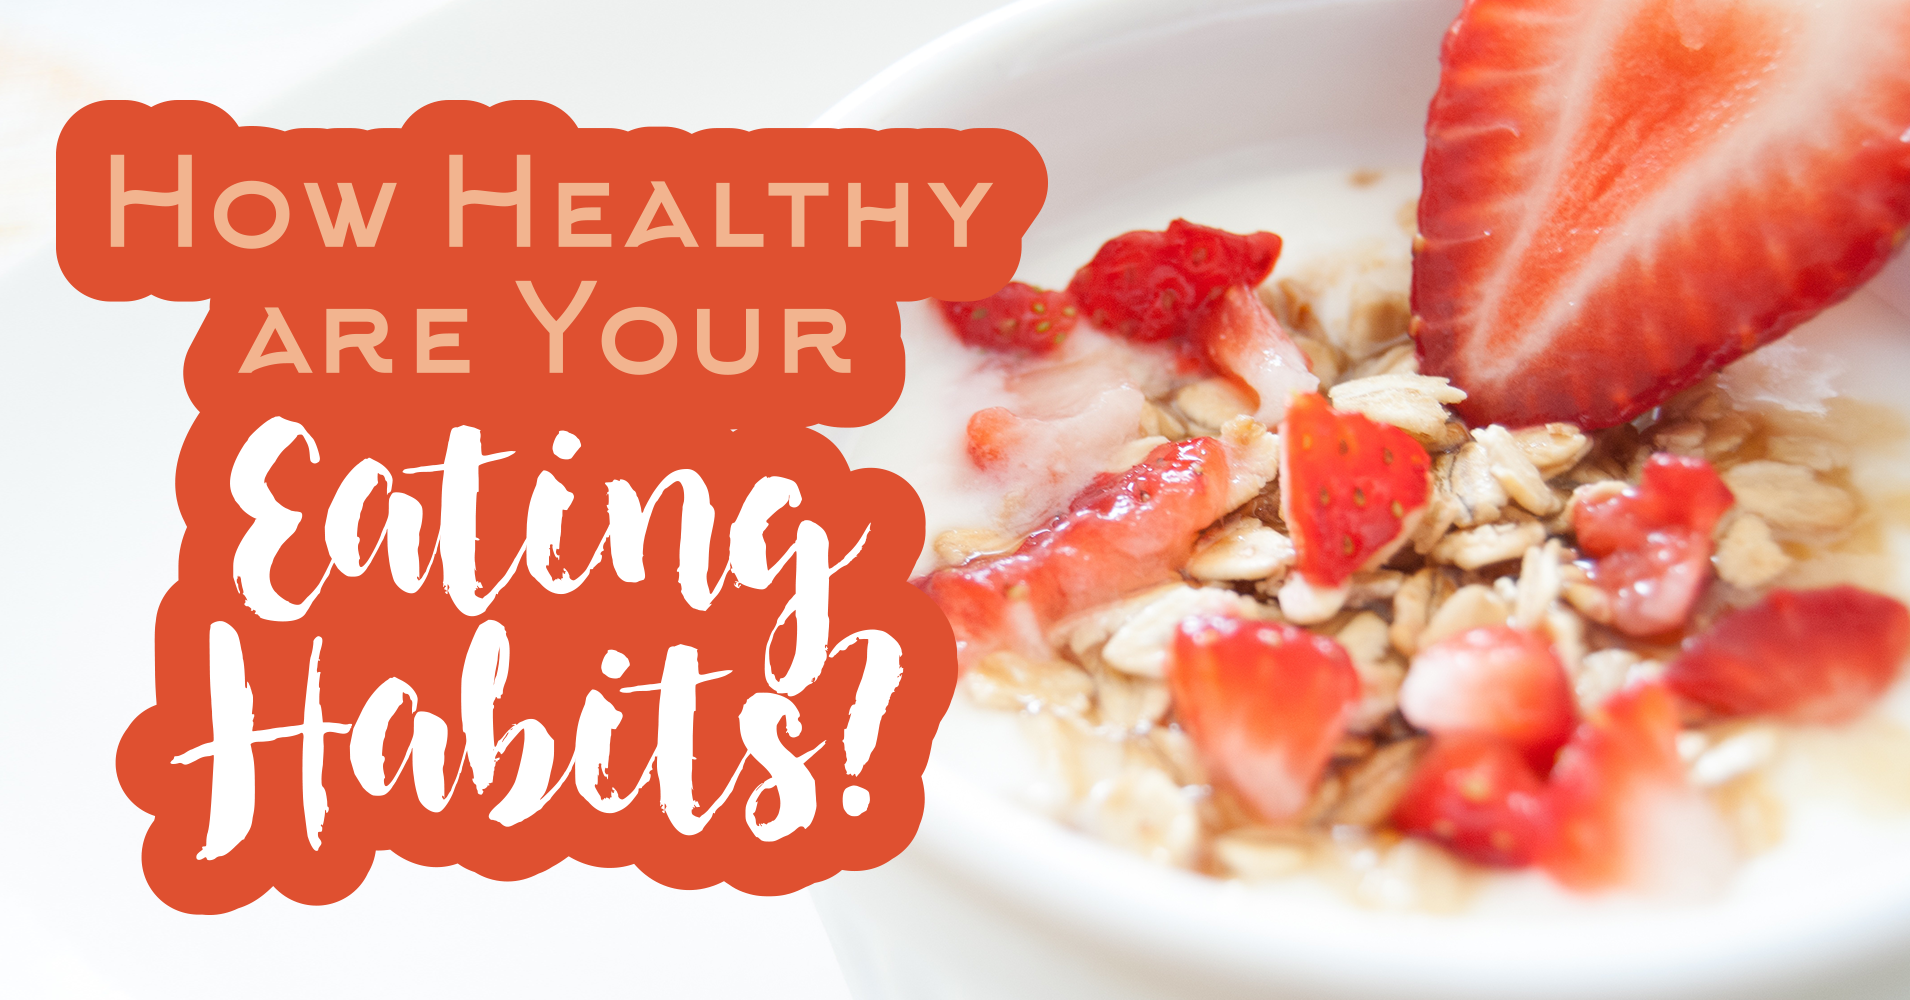 How Healthy Are Your Eating Habits? - Quiz - Quizony.com